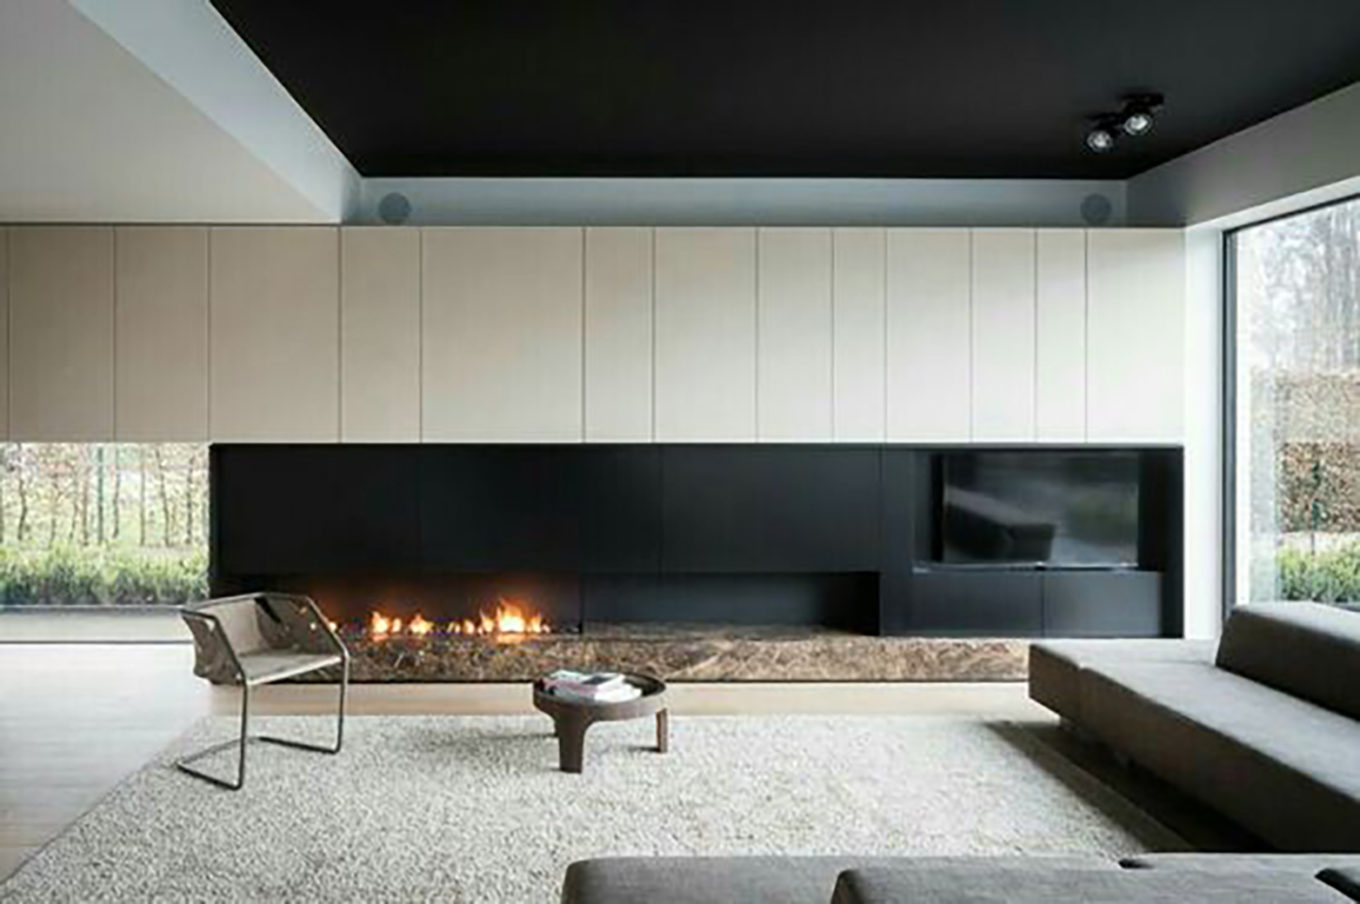 Linear gas fireplace with niche